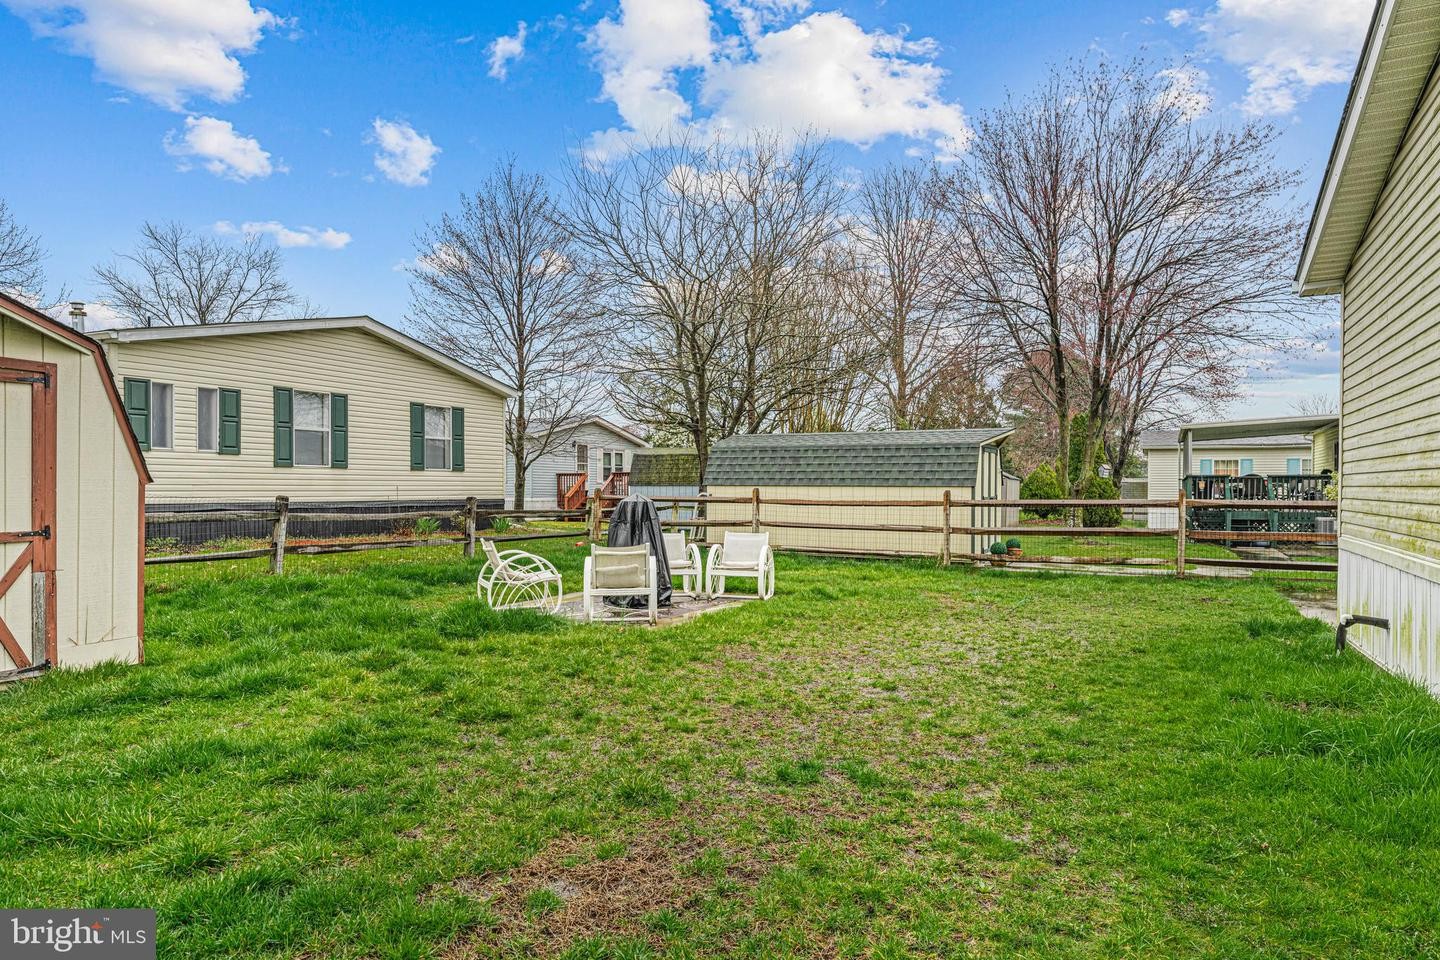 29. 810 Woodchuck Dr *** Best And Final Due 4/14 @ 5pm***